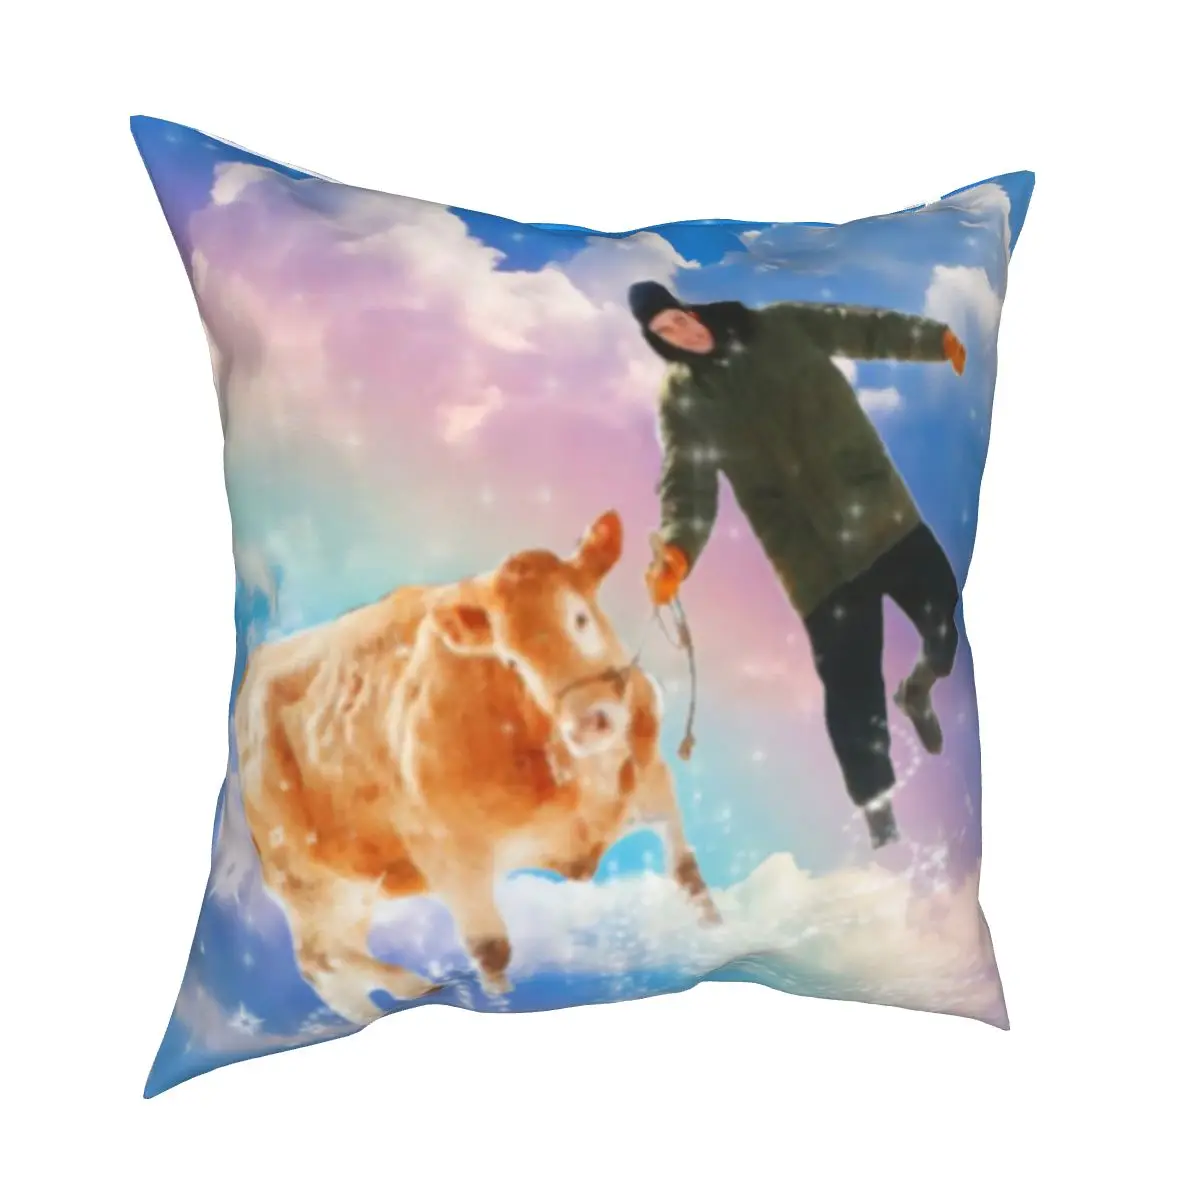 Robert Pattinson With A Cow On A Rainbow Pillowcase Printing Cushion Cover Decorations Throw Pillow Case Cover Living Room